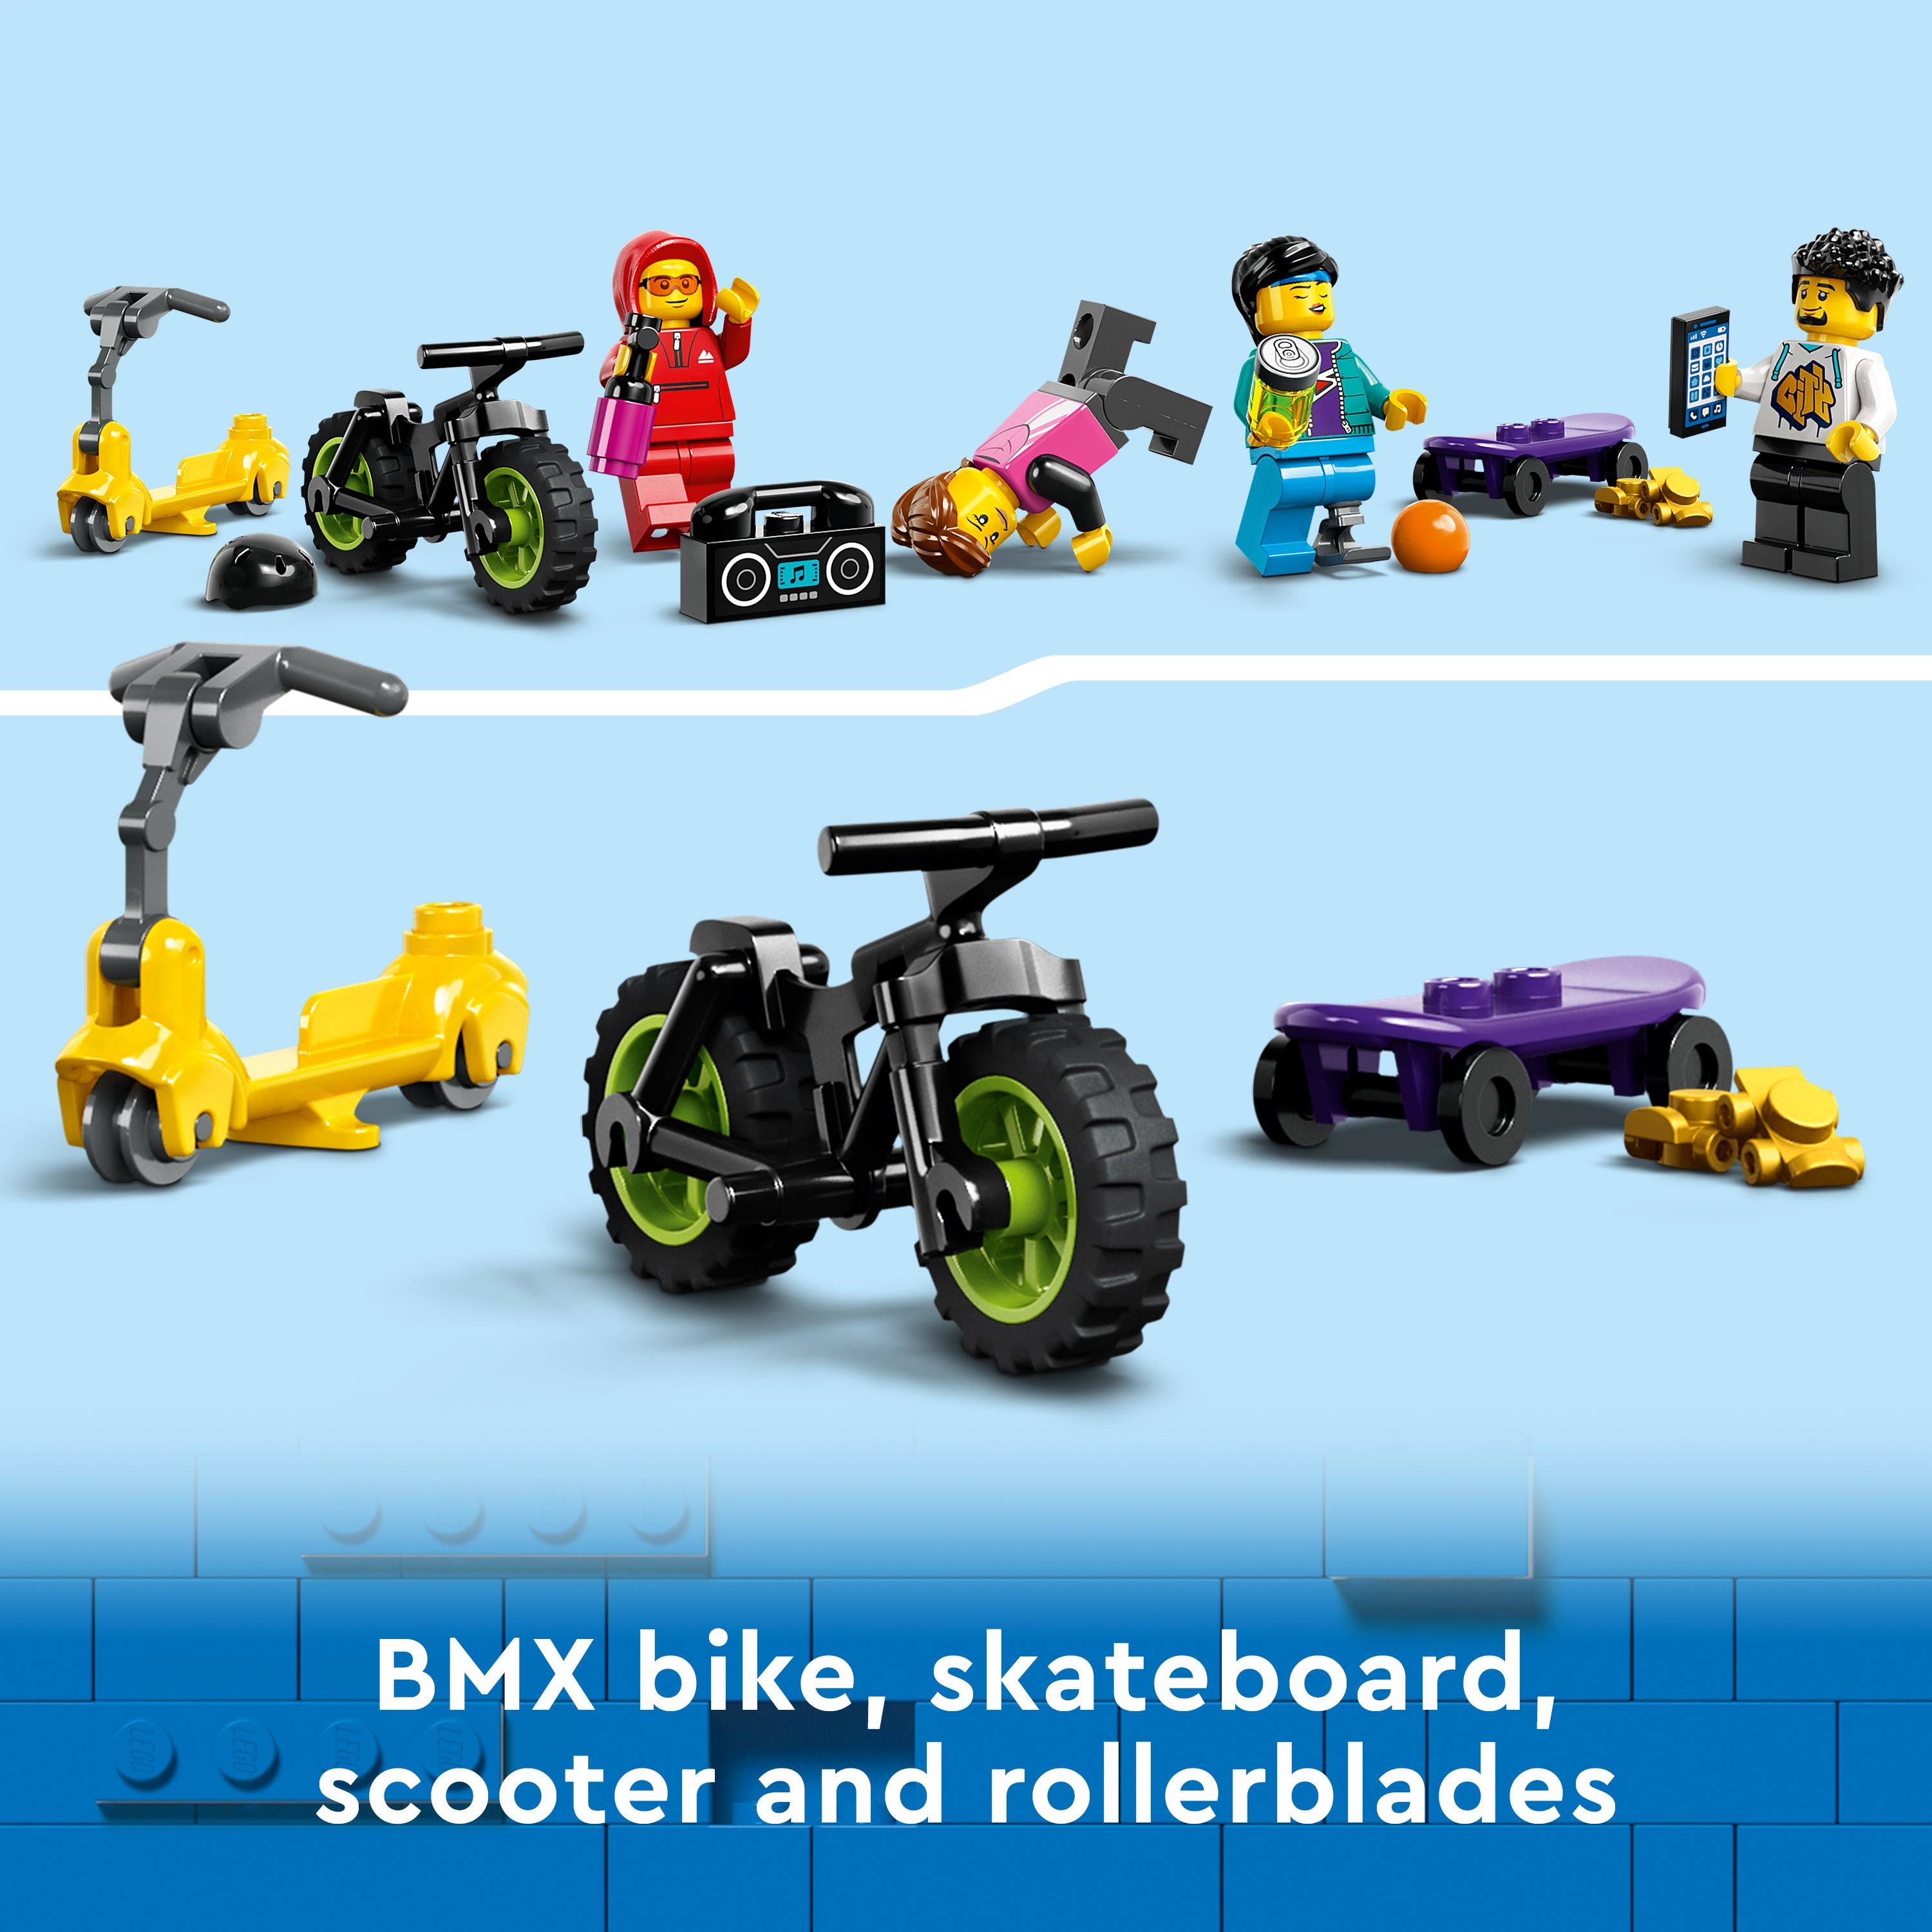 LEGO 60364 City Street Skate Park Set, Toy For Kids Aged 6 Plus Years Old with BMX Bike, Skateboard, Scooter, In-Line Skates and 4 Skater Minifigures to Perform Stunts, 2023 Set